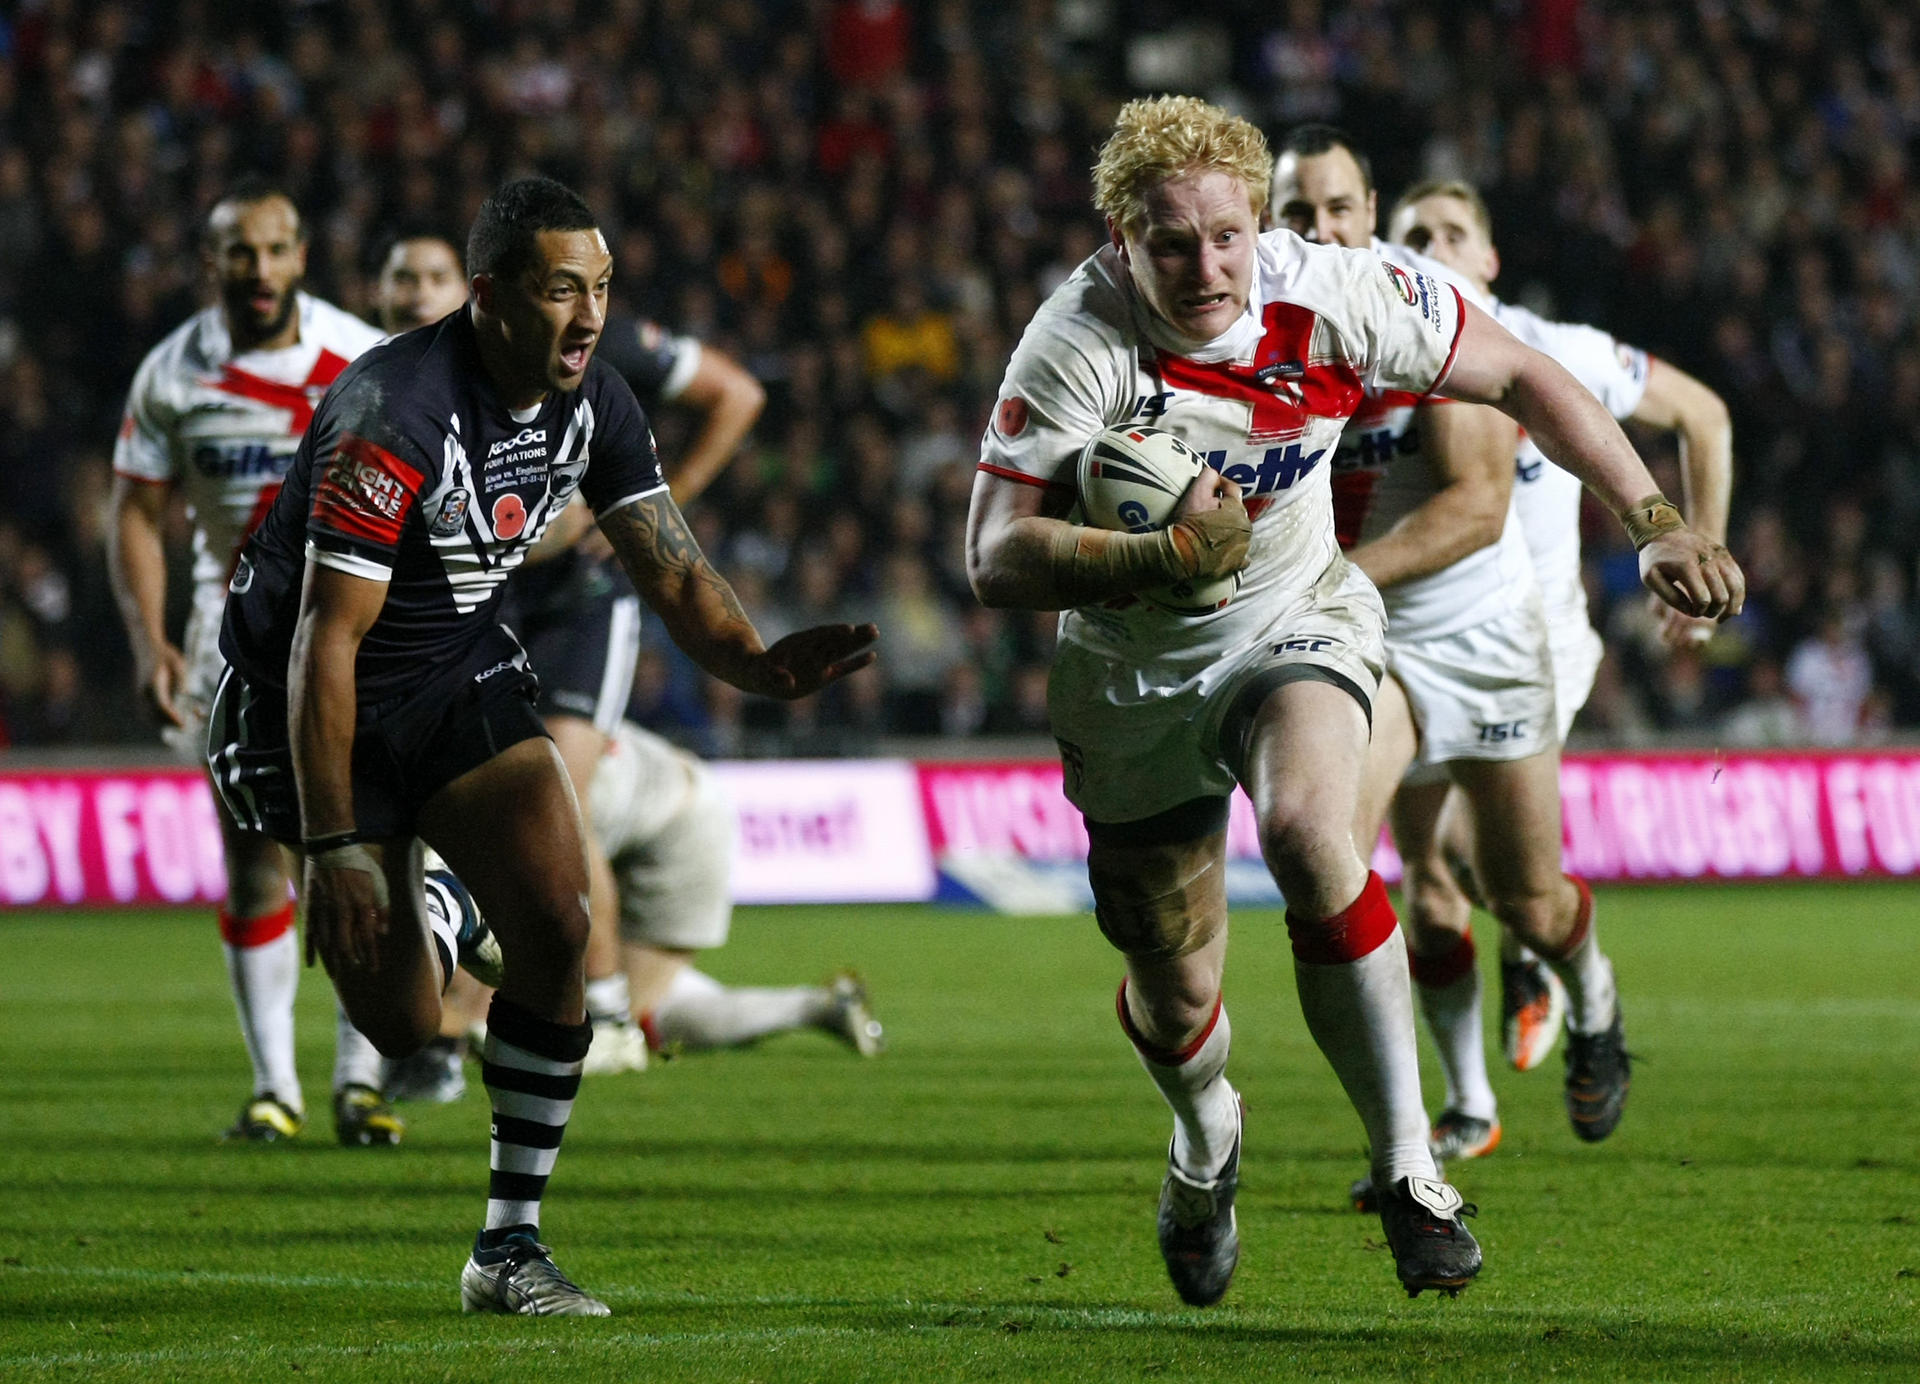 Benji Marshall chases England's James Graham during a Four Nations rugby league test match at Hull in England. Marshall switched to rugby union with the Auckland Blues but it has not worked out. Photo: AP